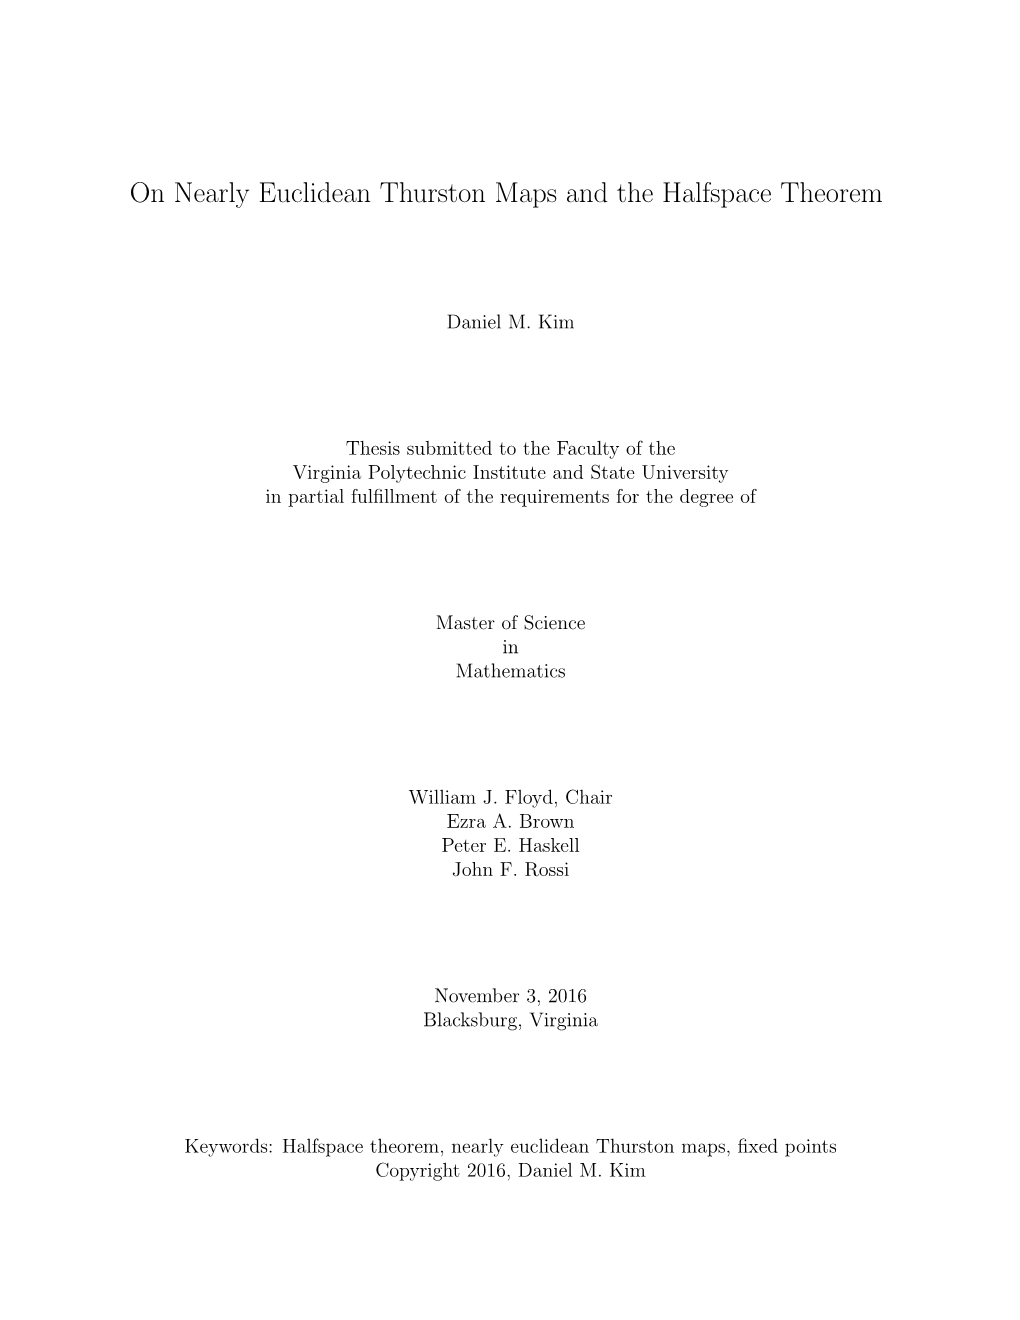 On Nearly Euclidean Thurston Maps and the Halfspace Theorem